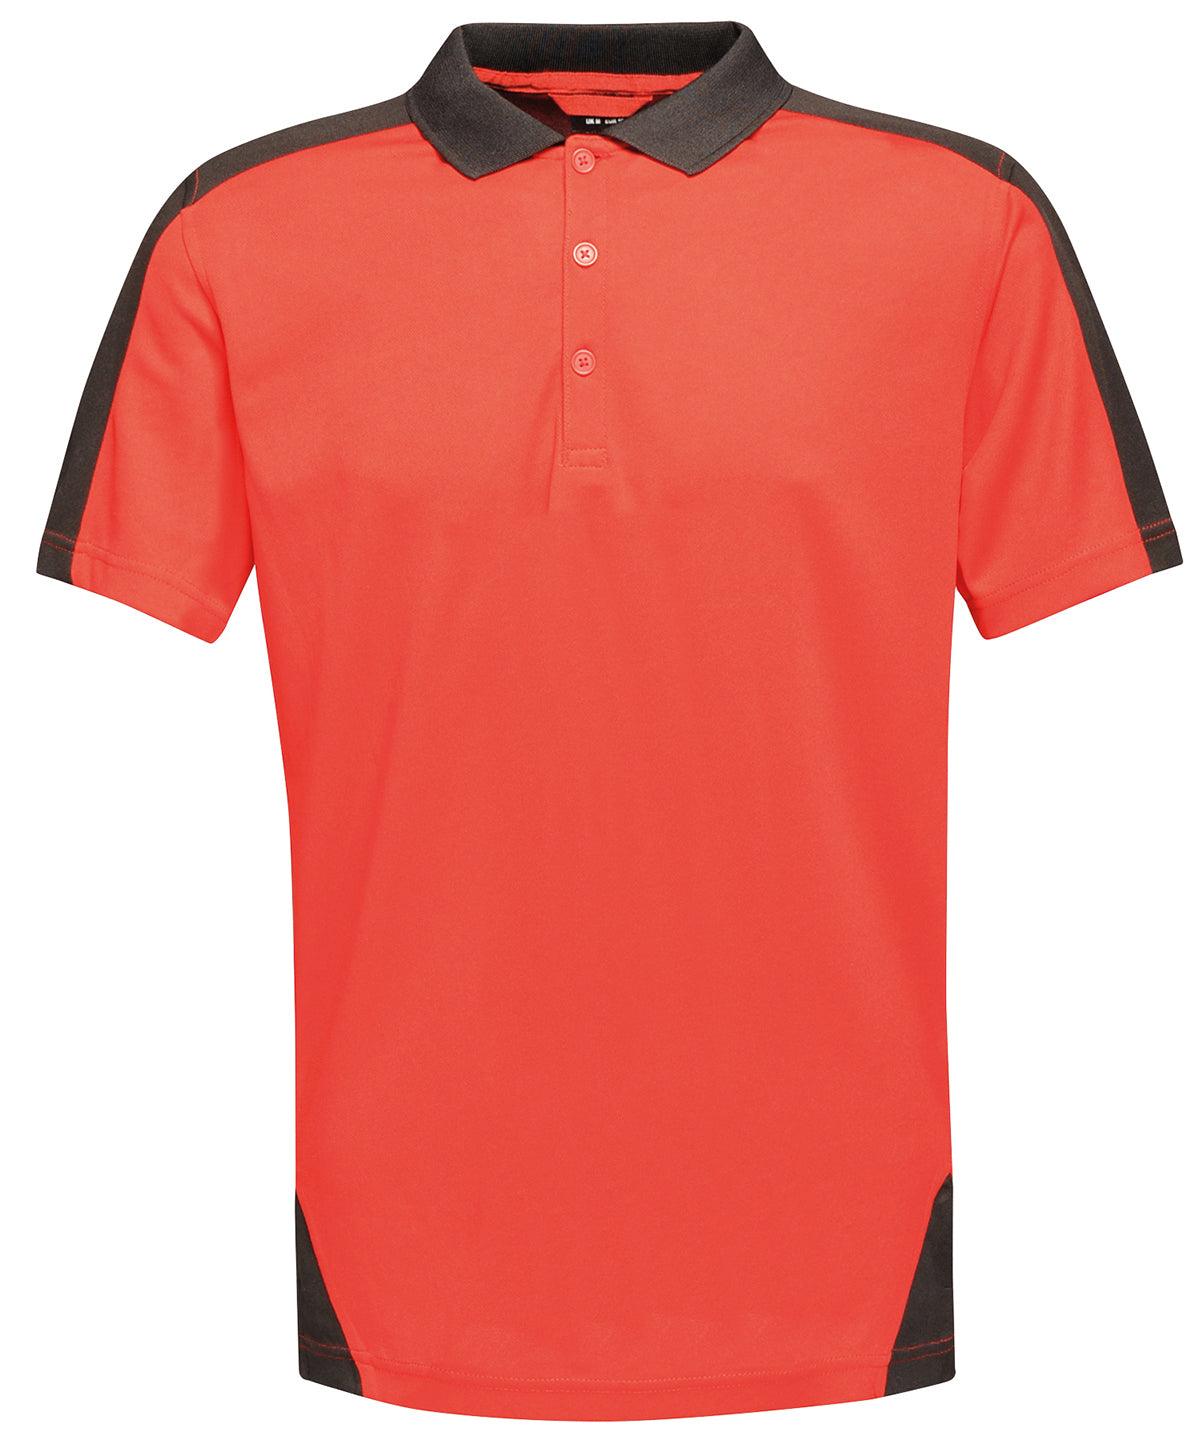 Classic Red/Black - Contrast wicking polo Polos Regatta Contrast Polos & Casual Schoolwear Centres